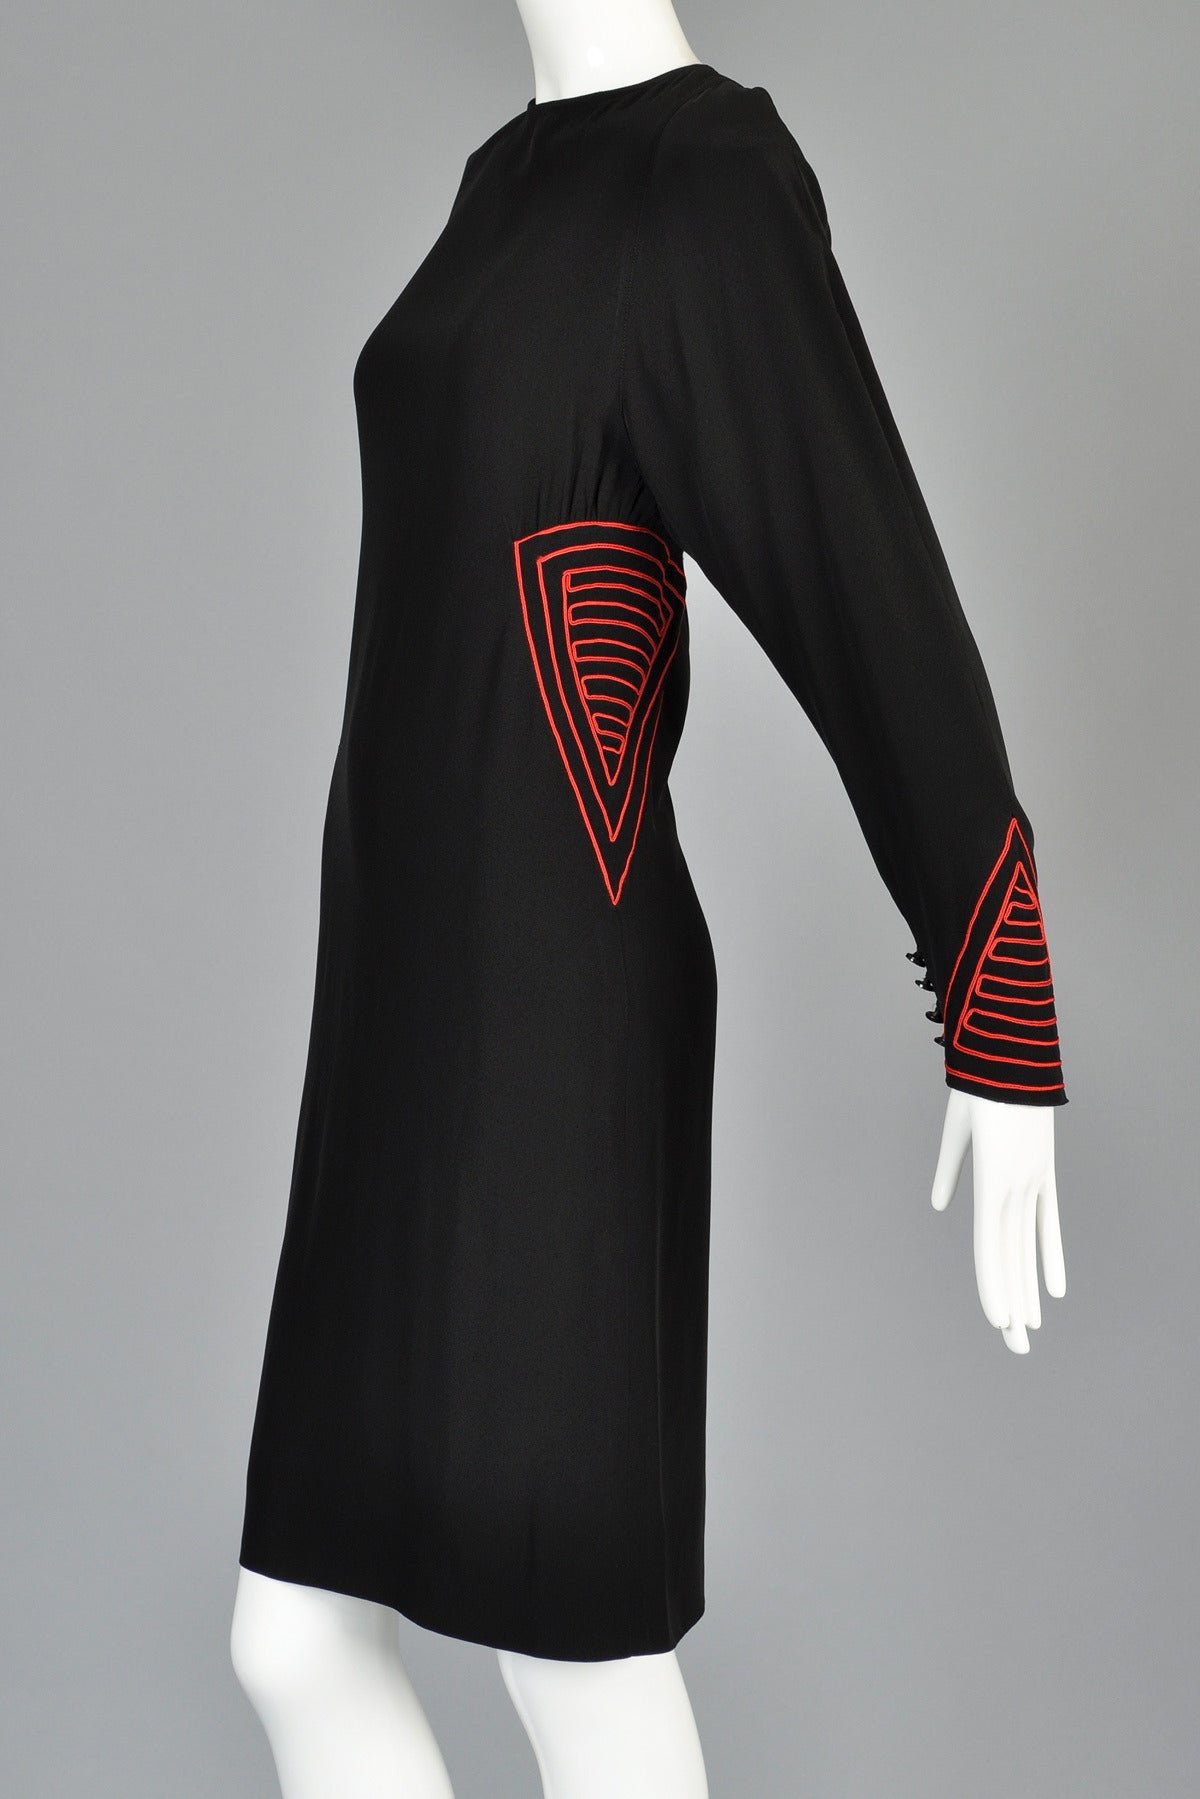 Karl Lagerfeld for Chloe 1980's Embroidered Dress 1